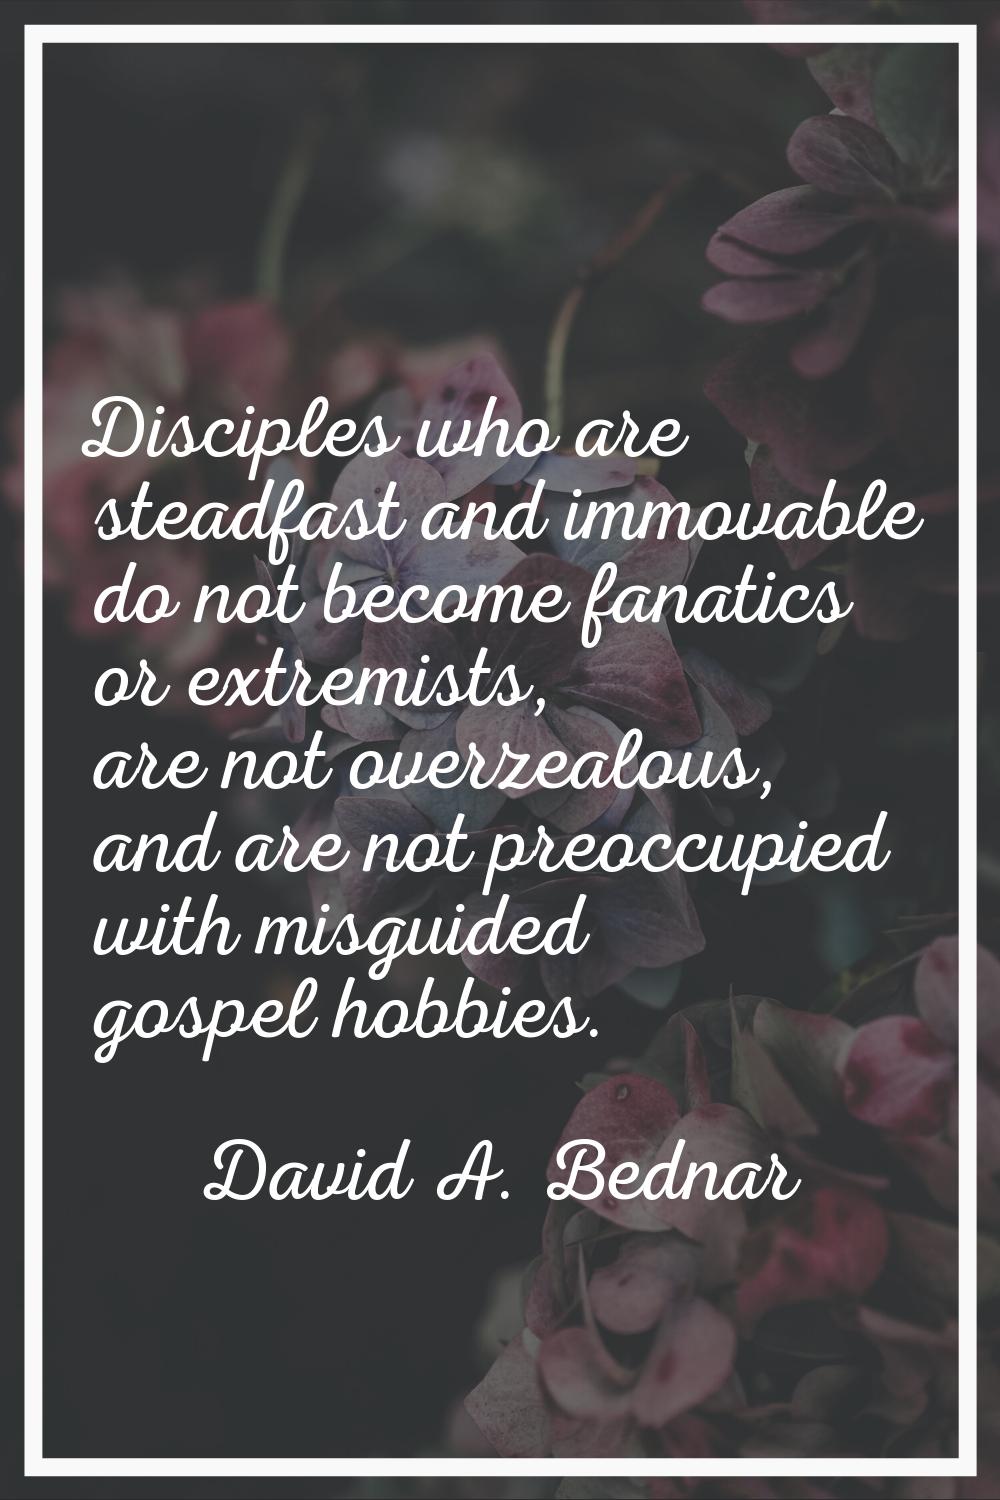 Disciples who are steadfast and immovable do not become fanatics or extremists, are not overzealous